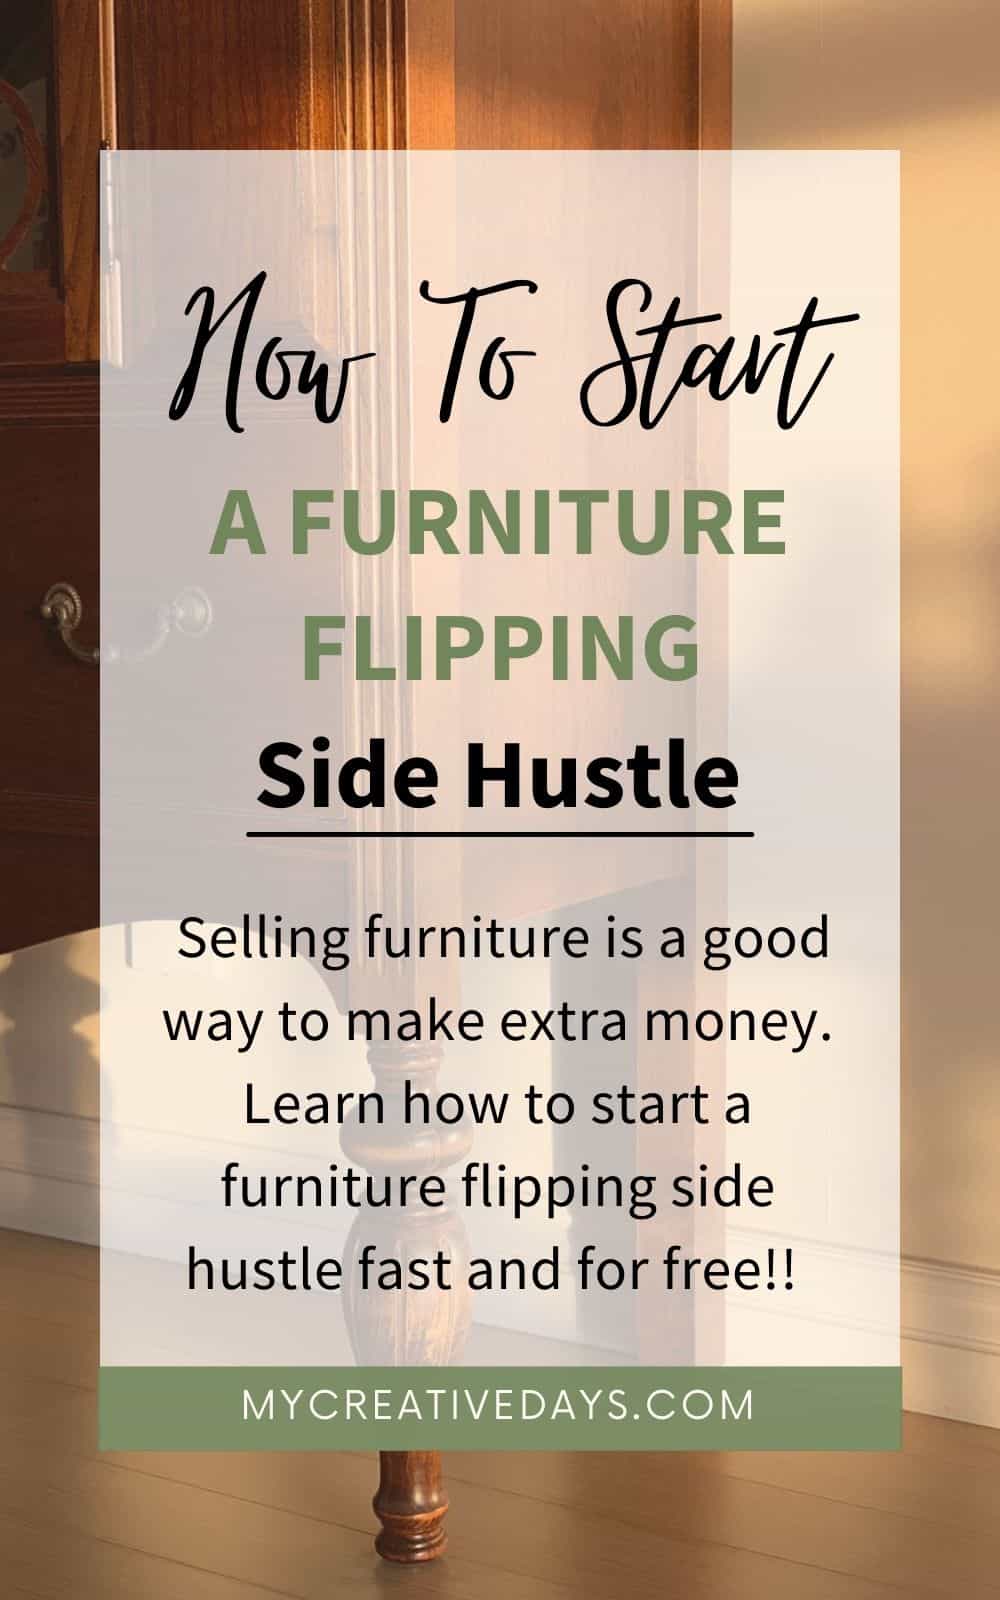 Selling furniture is a good way to make extra money. Click to learn how to start a furniture flipping side hustle fast and for free.